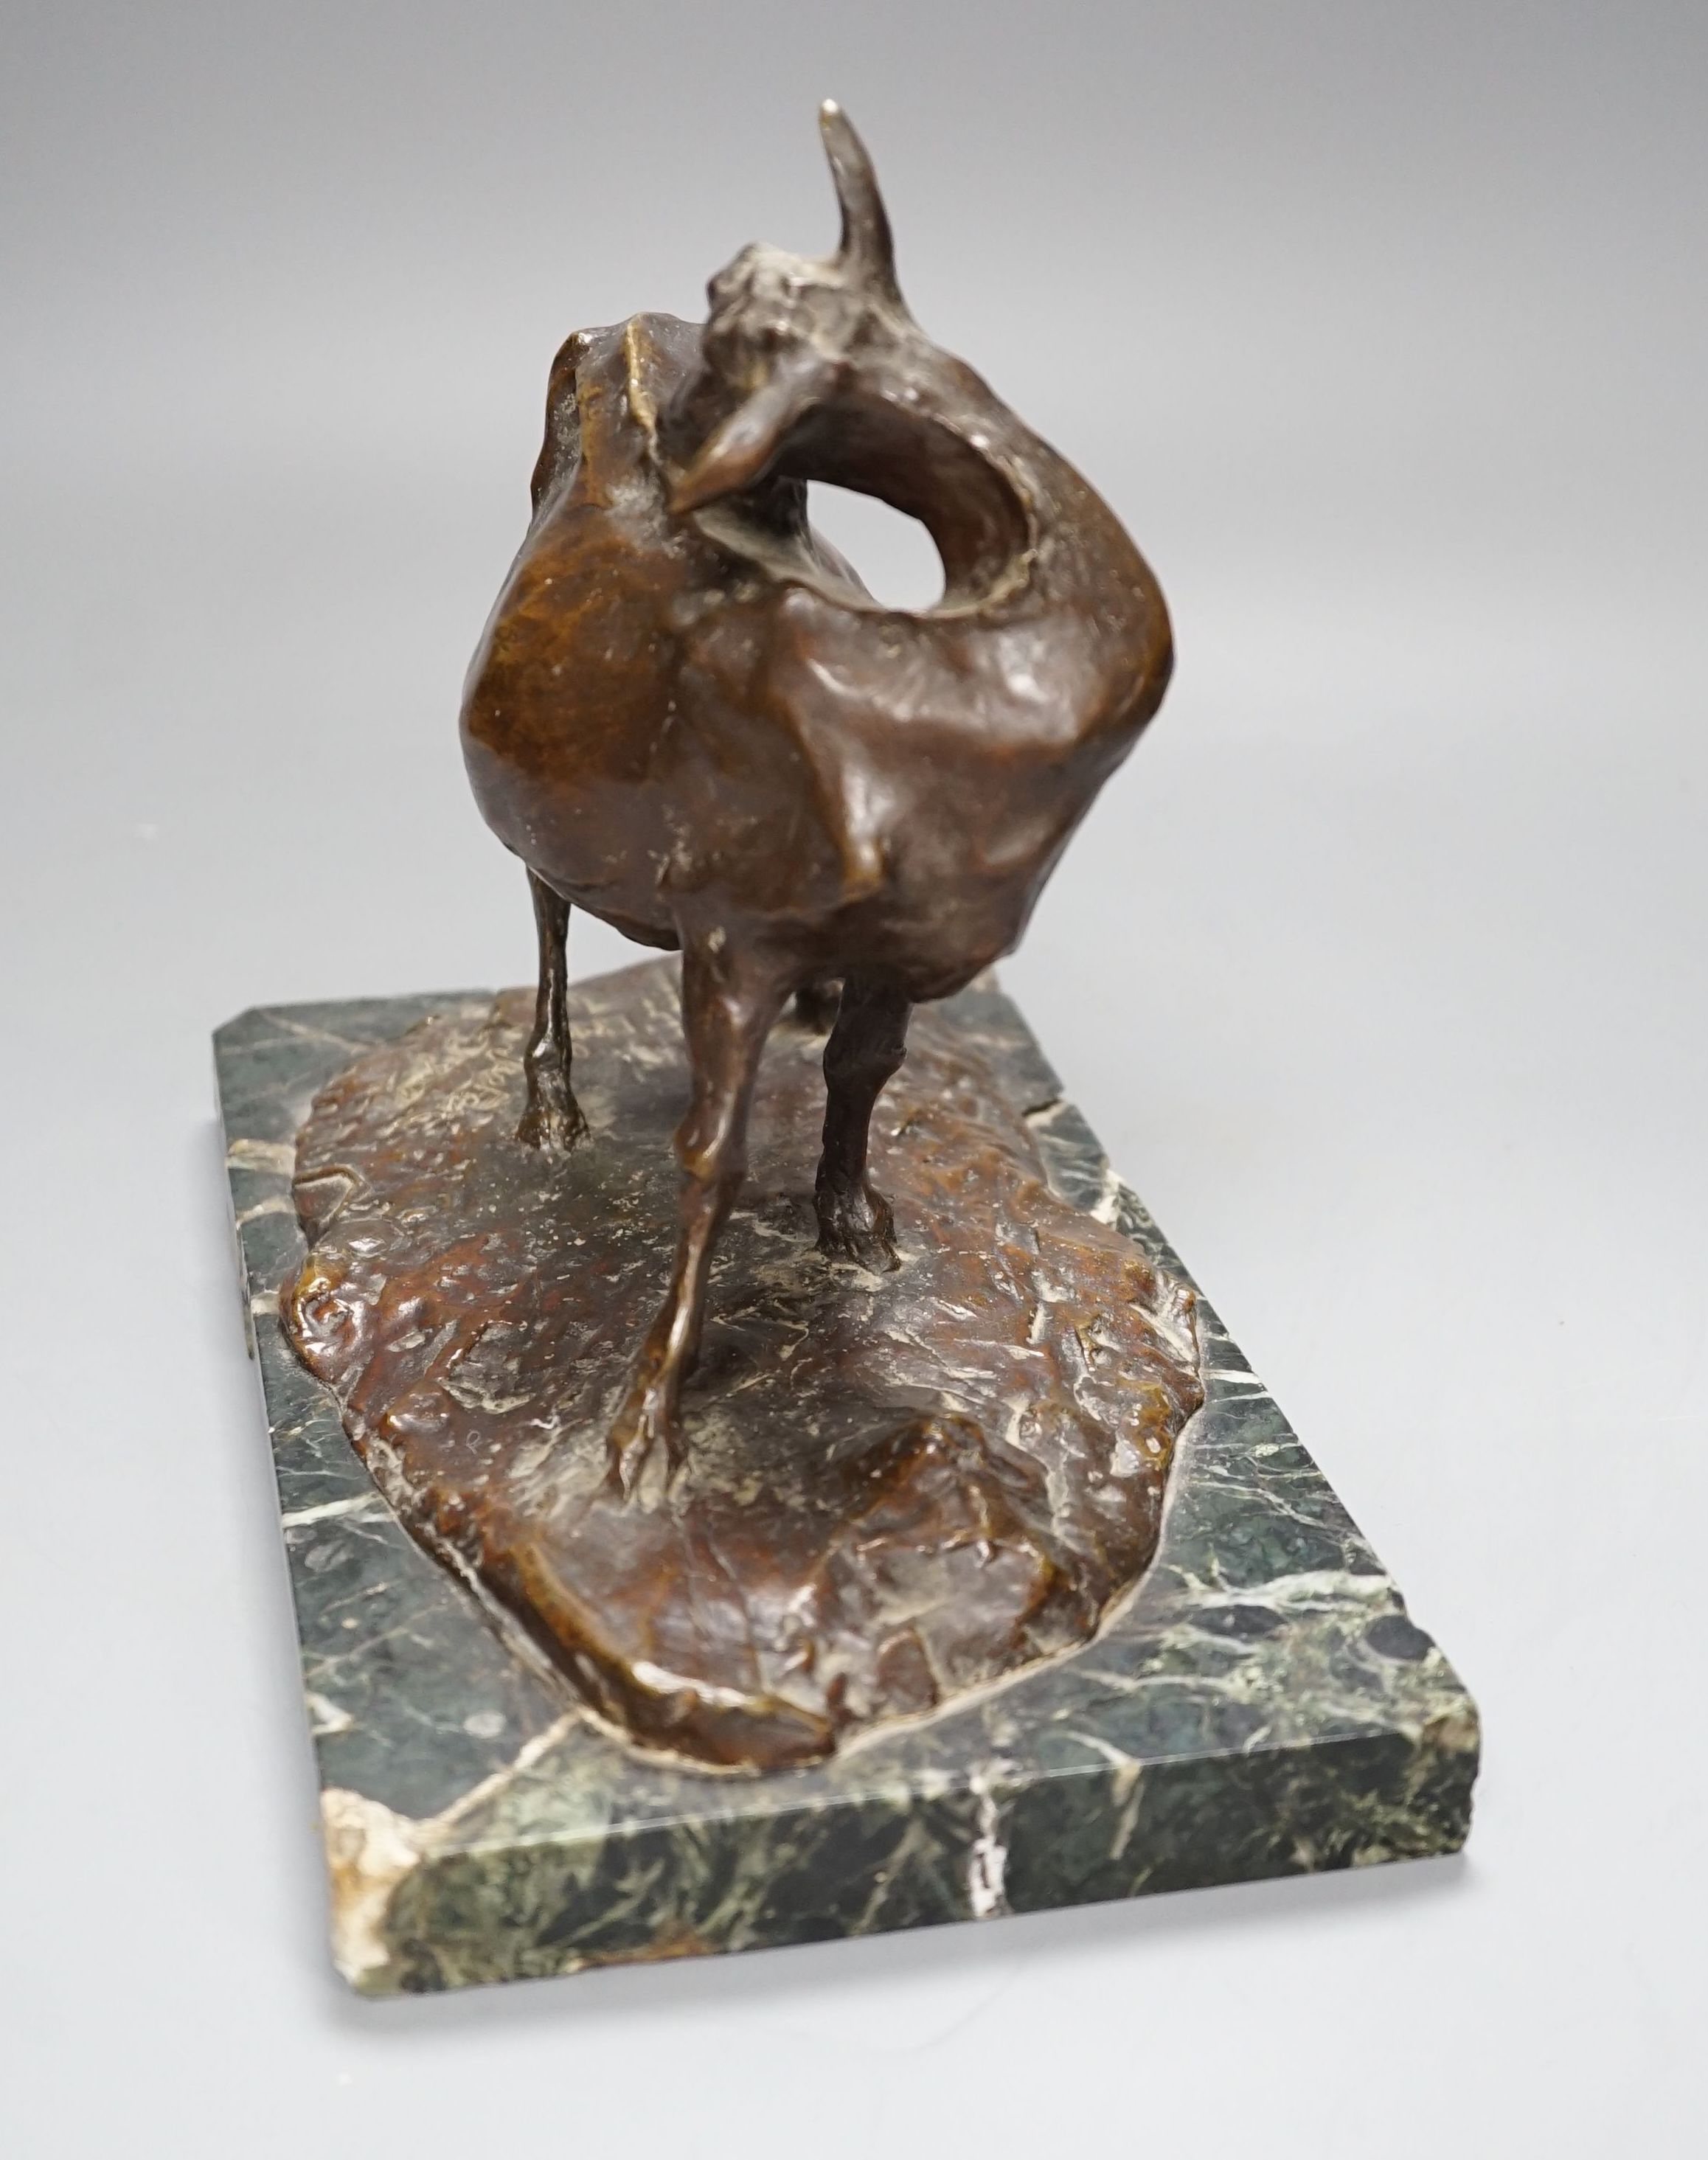 A bronze sculpture depicting a goat, on marbled base by Robert Greter, dated 1910 - 20cm high